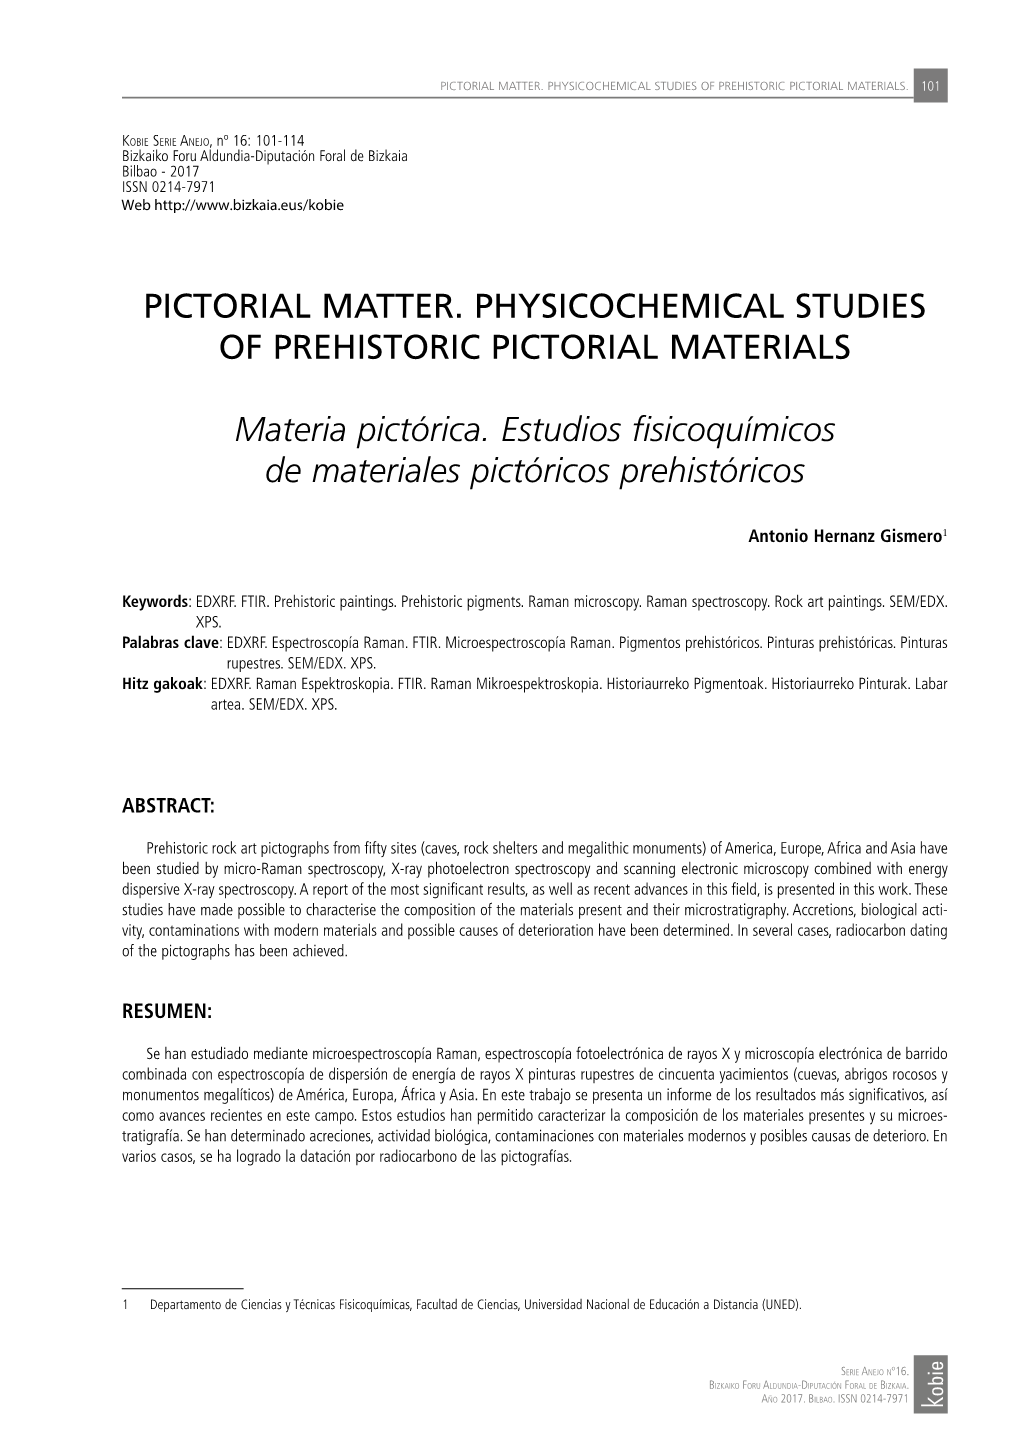 Pictorial Matter. Physicochemical Studies of Prehistoric Pictorial Materials